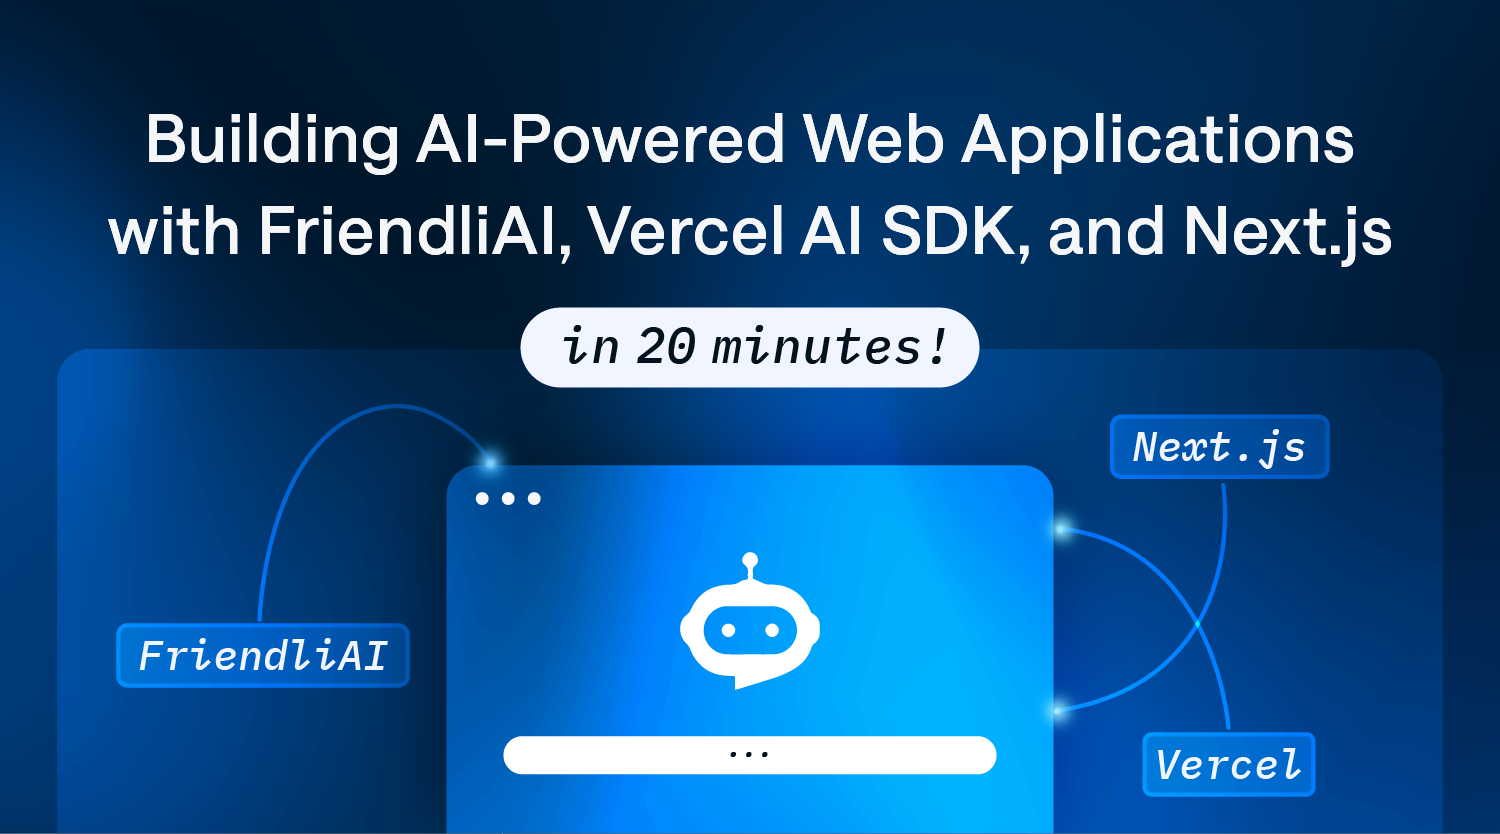 Building AI-Powered Web Applications In 20 Minutes with FriendliAI, Vercel AI SDK, and Next.js thumbnail